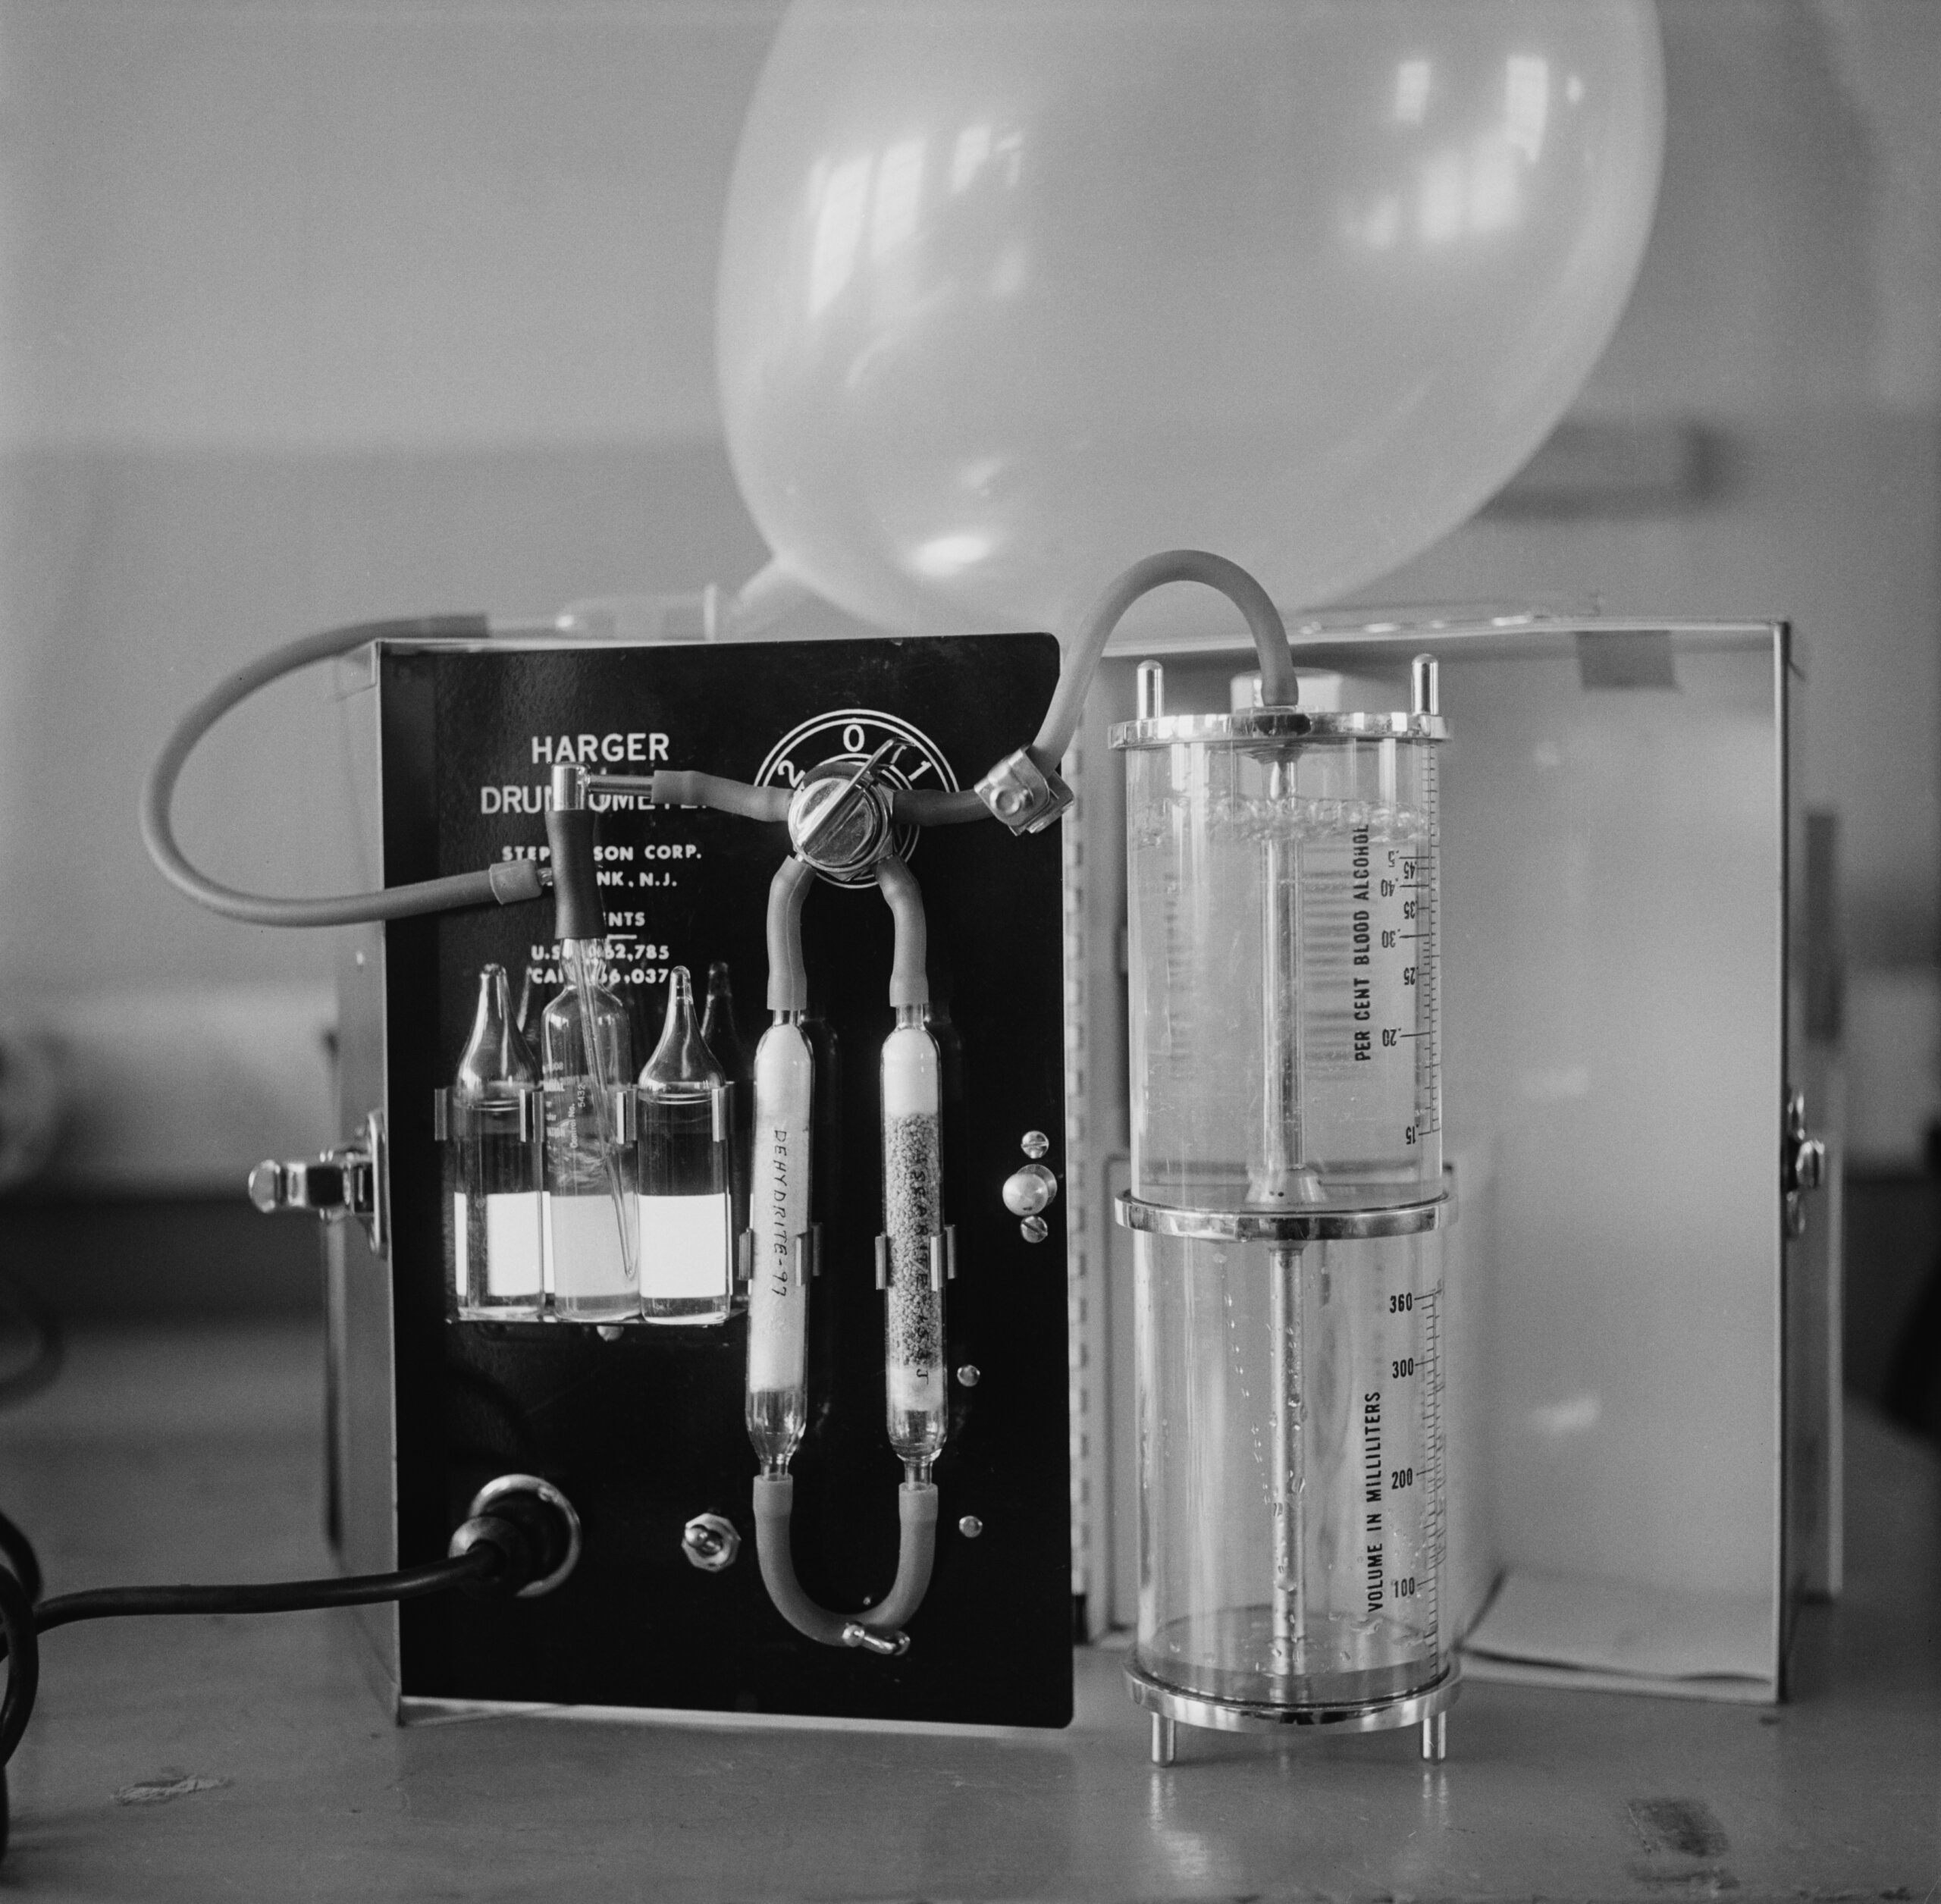 The first breathalyzer, the Drunkometer, invented in 1938.